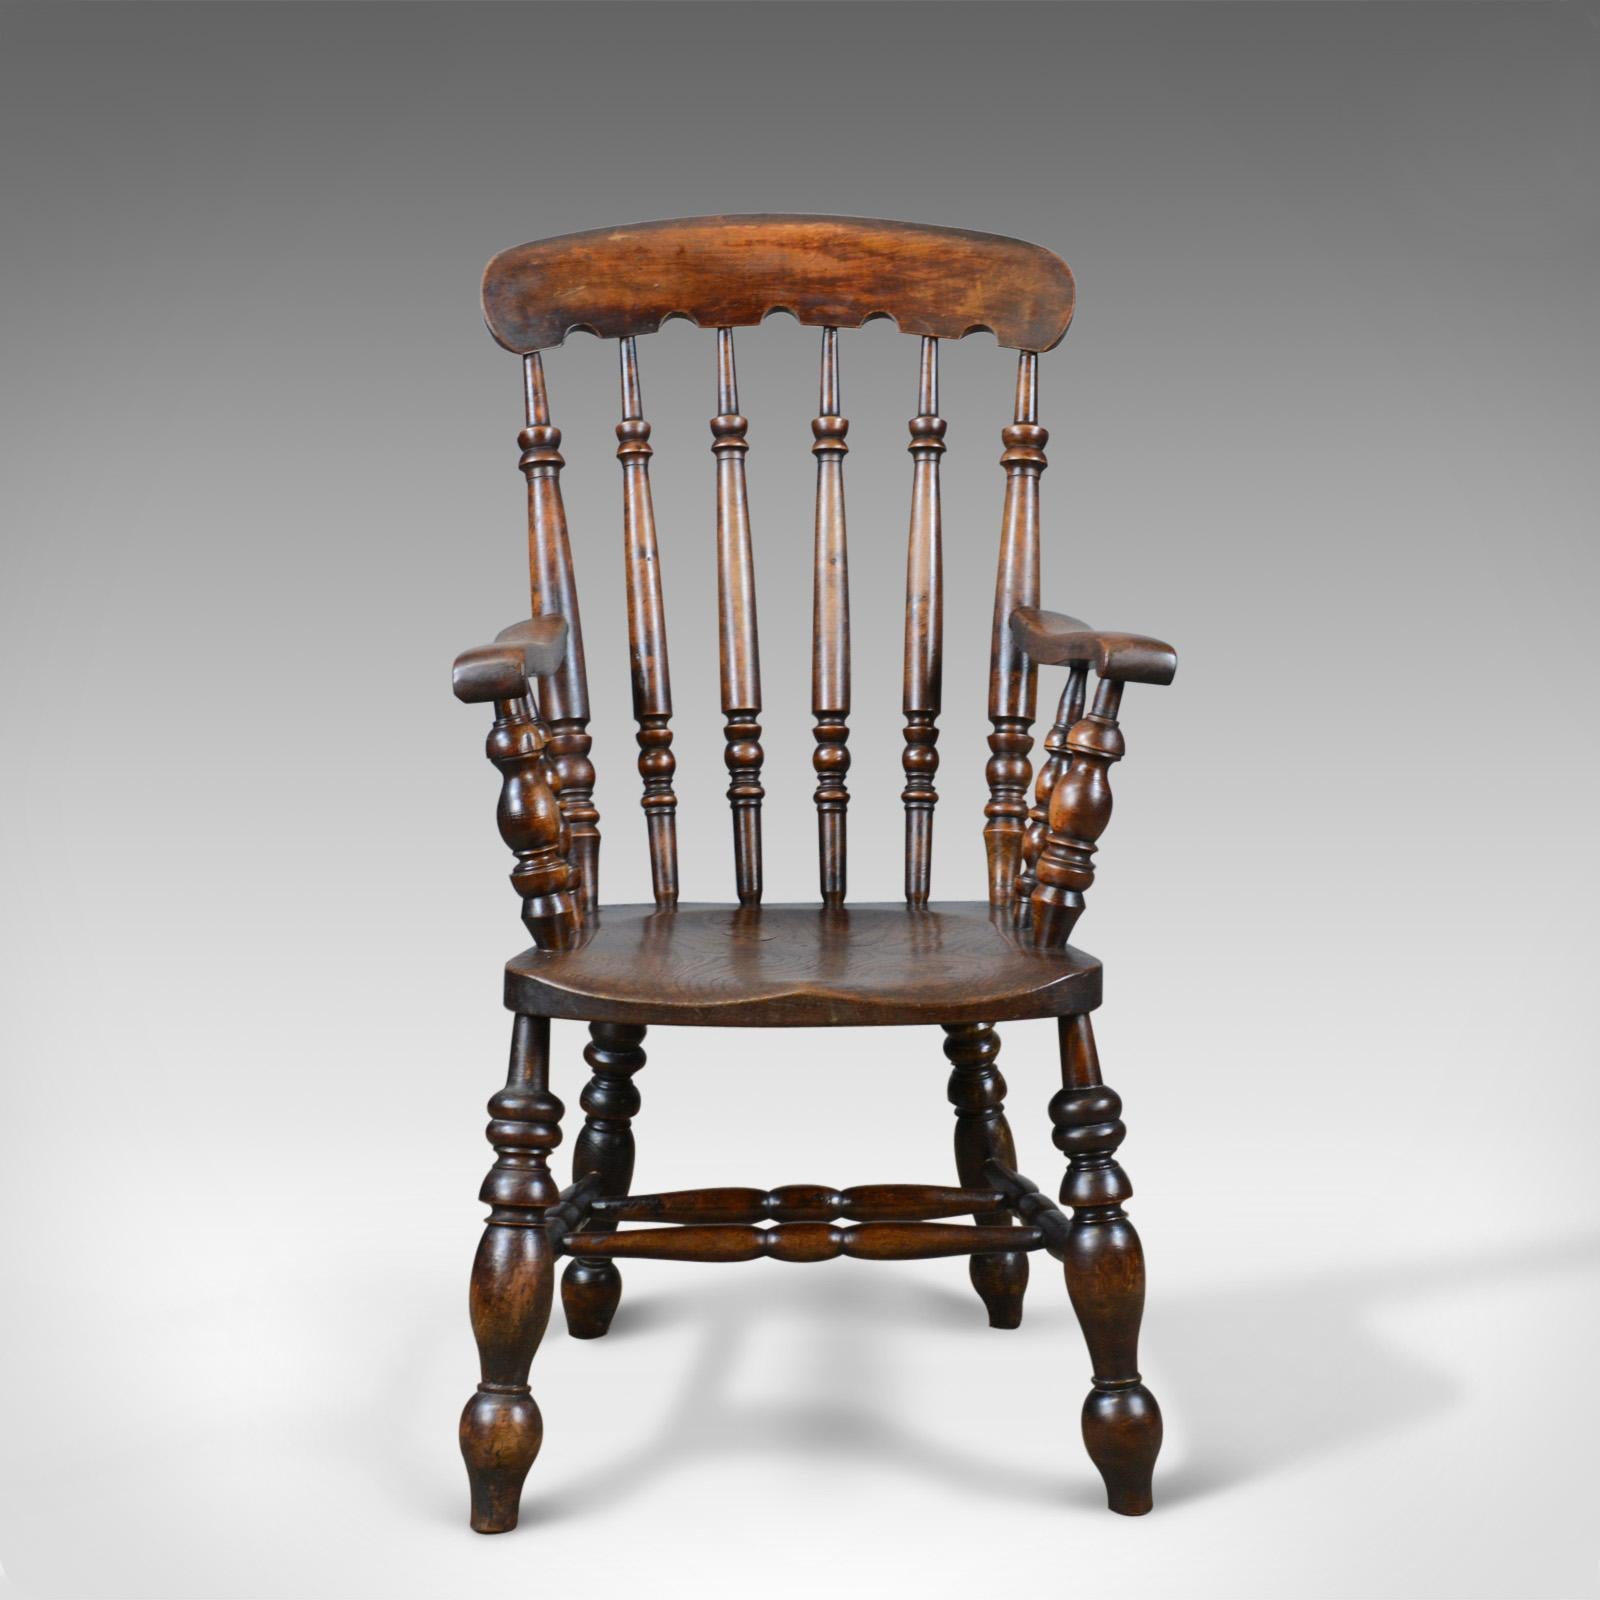 This is an antique elbow chair, an English, Victorian stick-back Windsor chair in elm dating to the late 19th century, circa 1880.

Appealing colour and a desirable aged patina
Grain interest to the thick elm, saddle seat slab
Attractive,